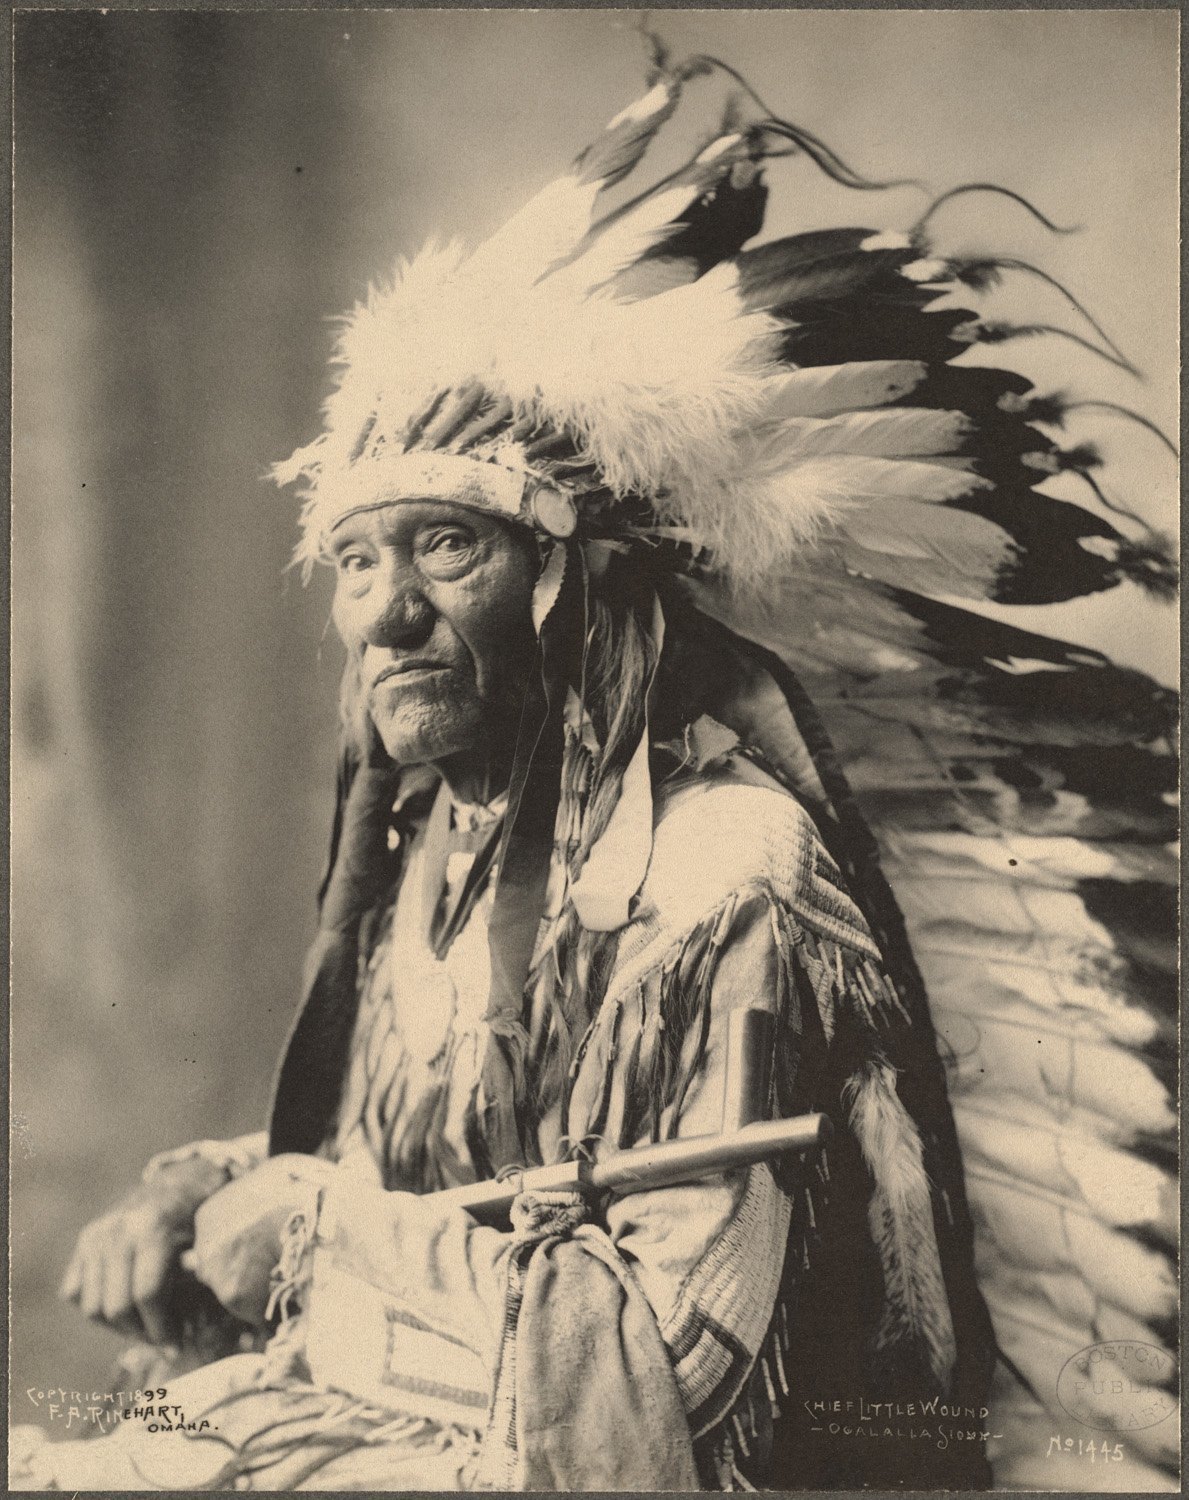 Chief Little Wound, Ogalalla Sioux, 1899. (Photo by Frank A. Rinehart)